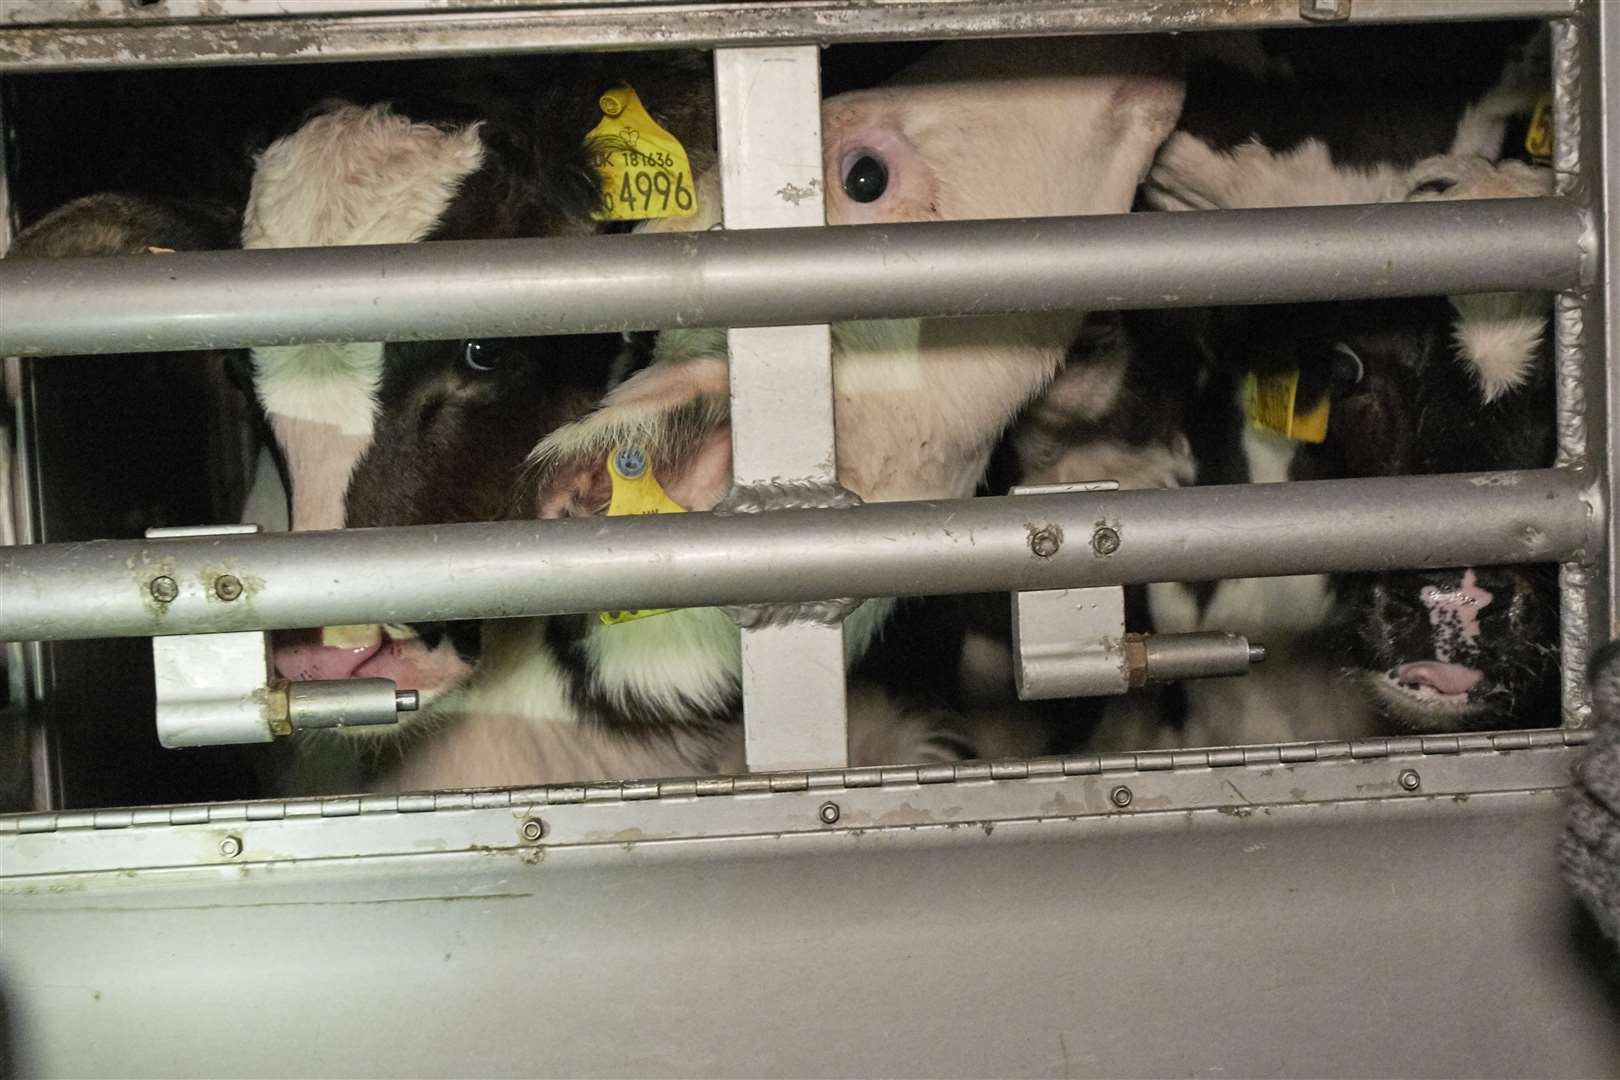 Live exports of animals to be slaughtered could be banned. Picture: RSPCA